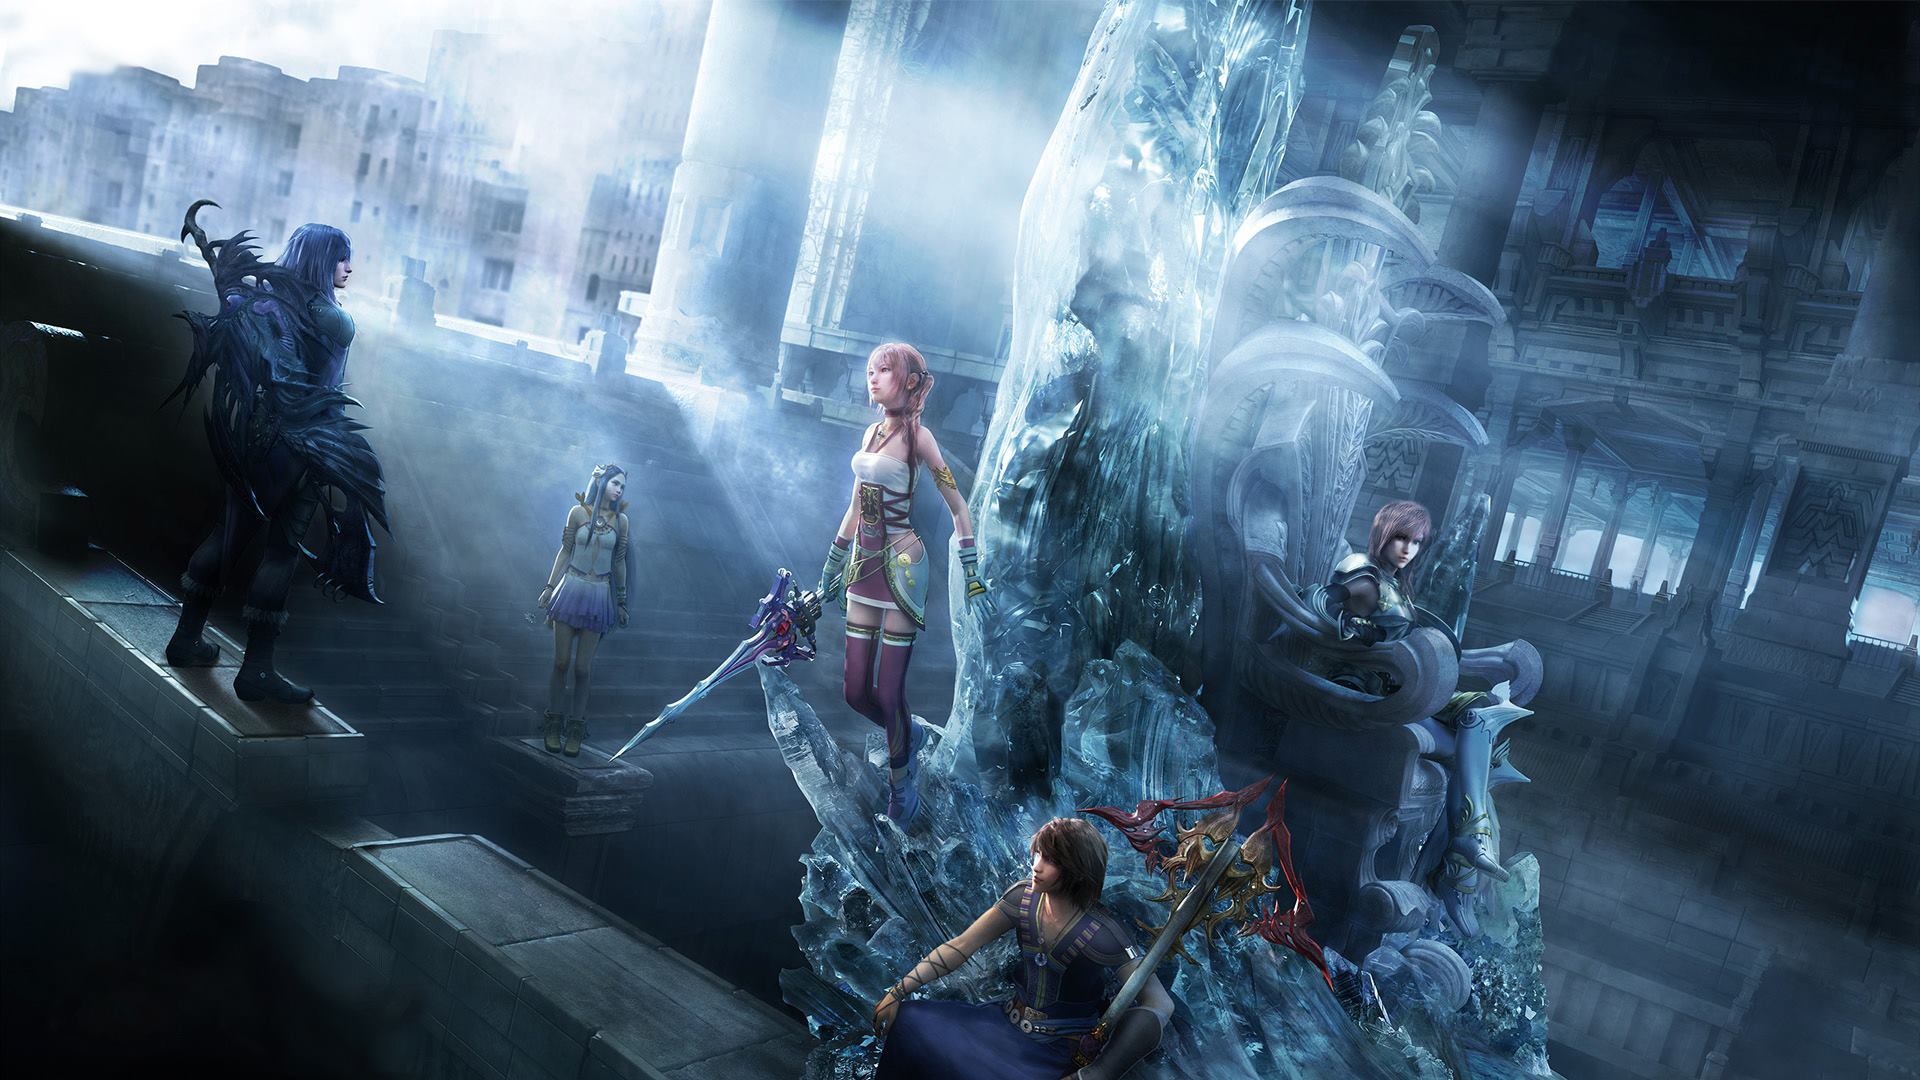 Final Fantasy XIII Wallpaper HD Poster Select Game